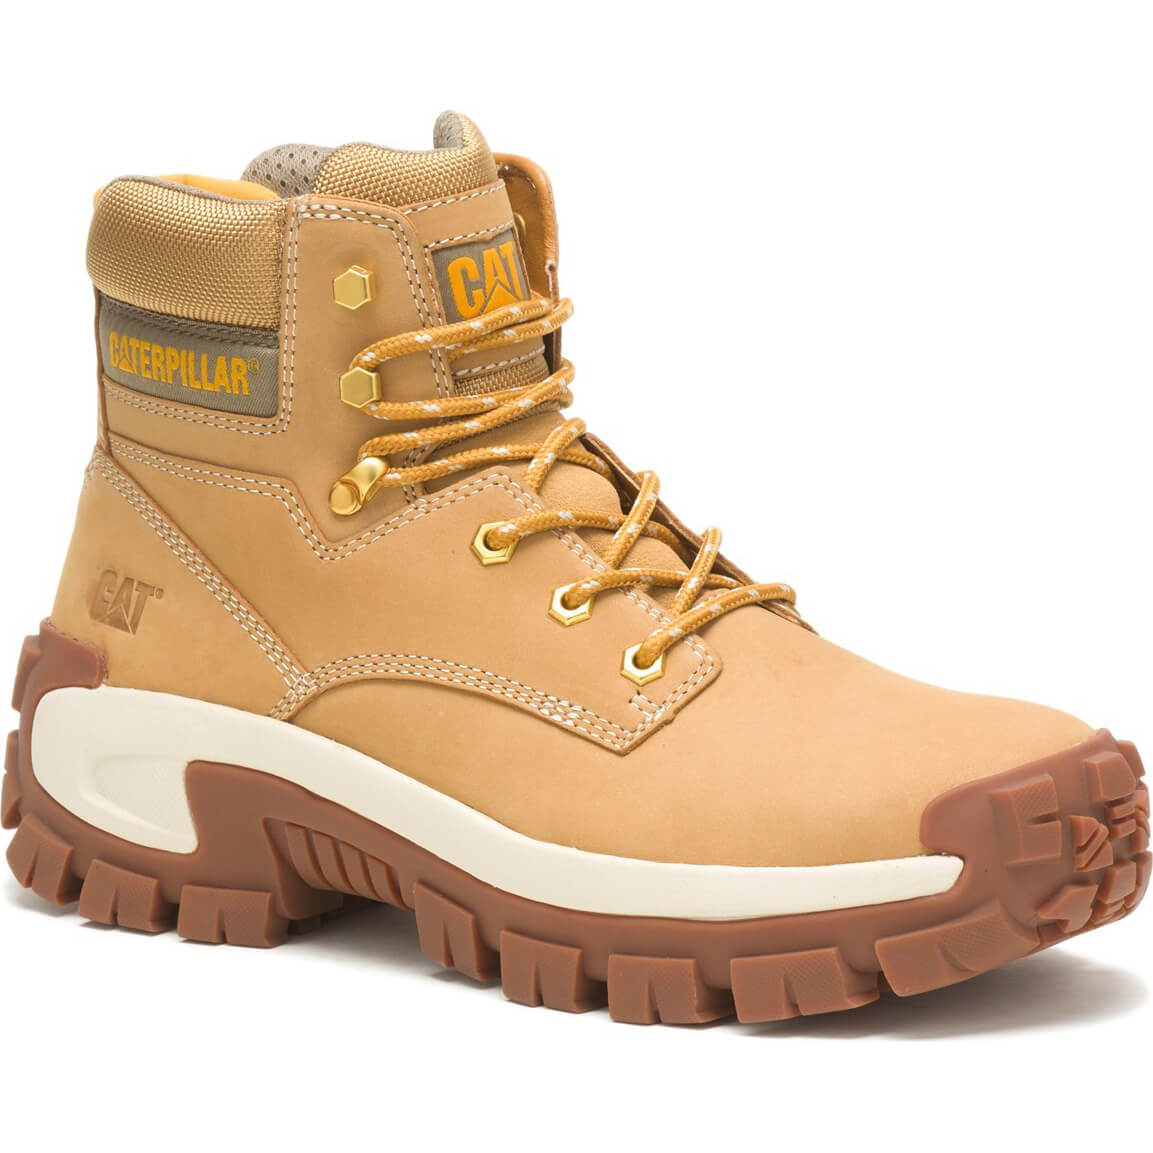 Image of Caterpillar Mens Invader Hiker Safety Boot Honey Size 7